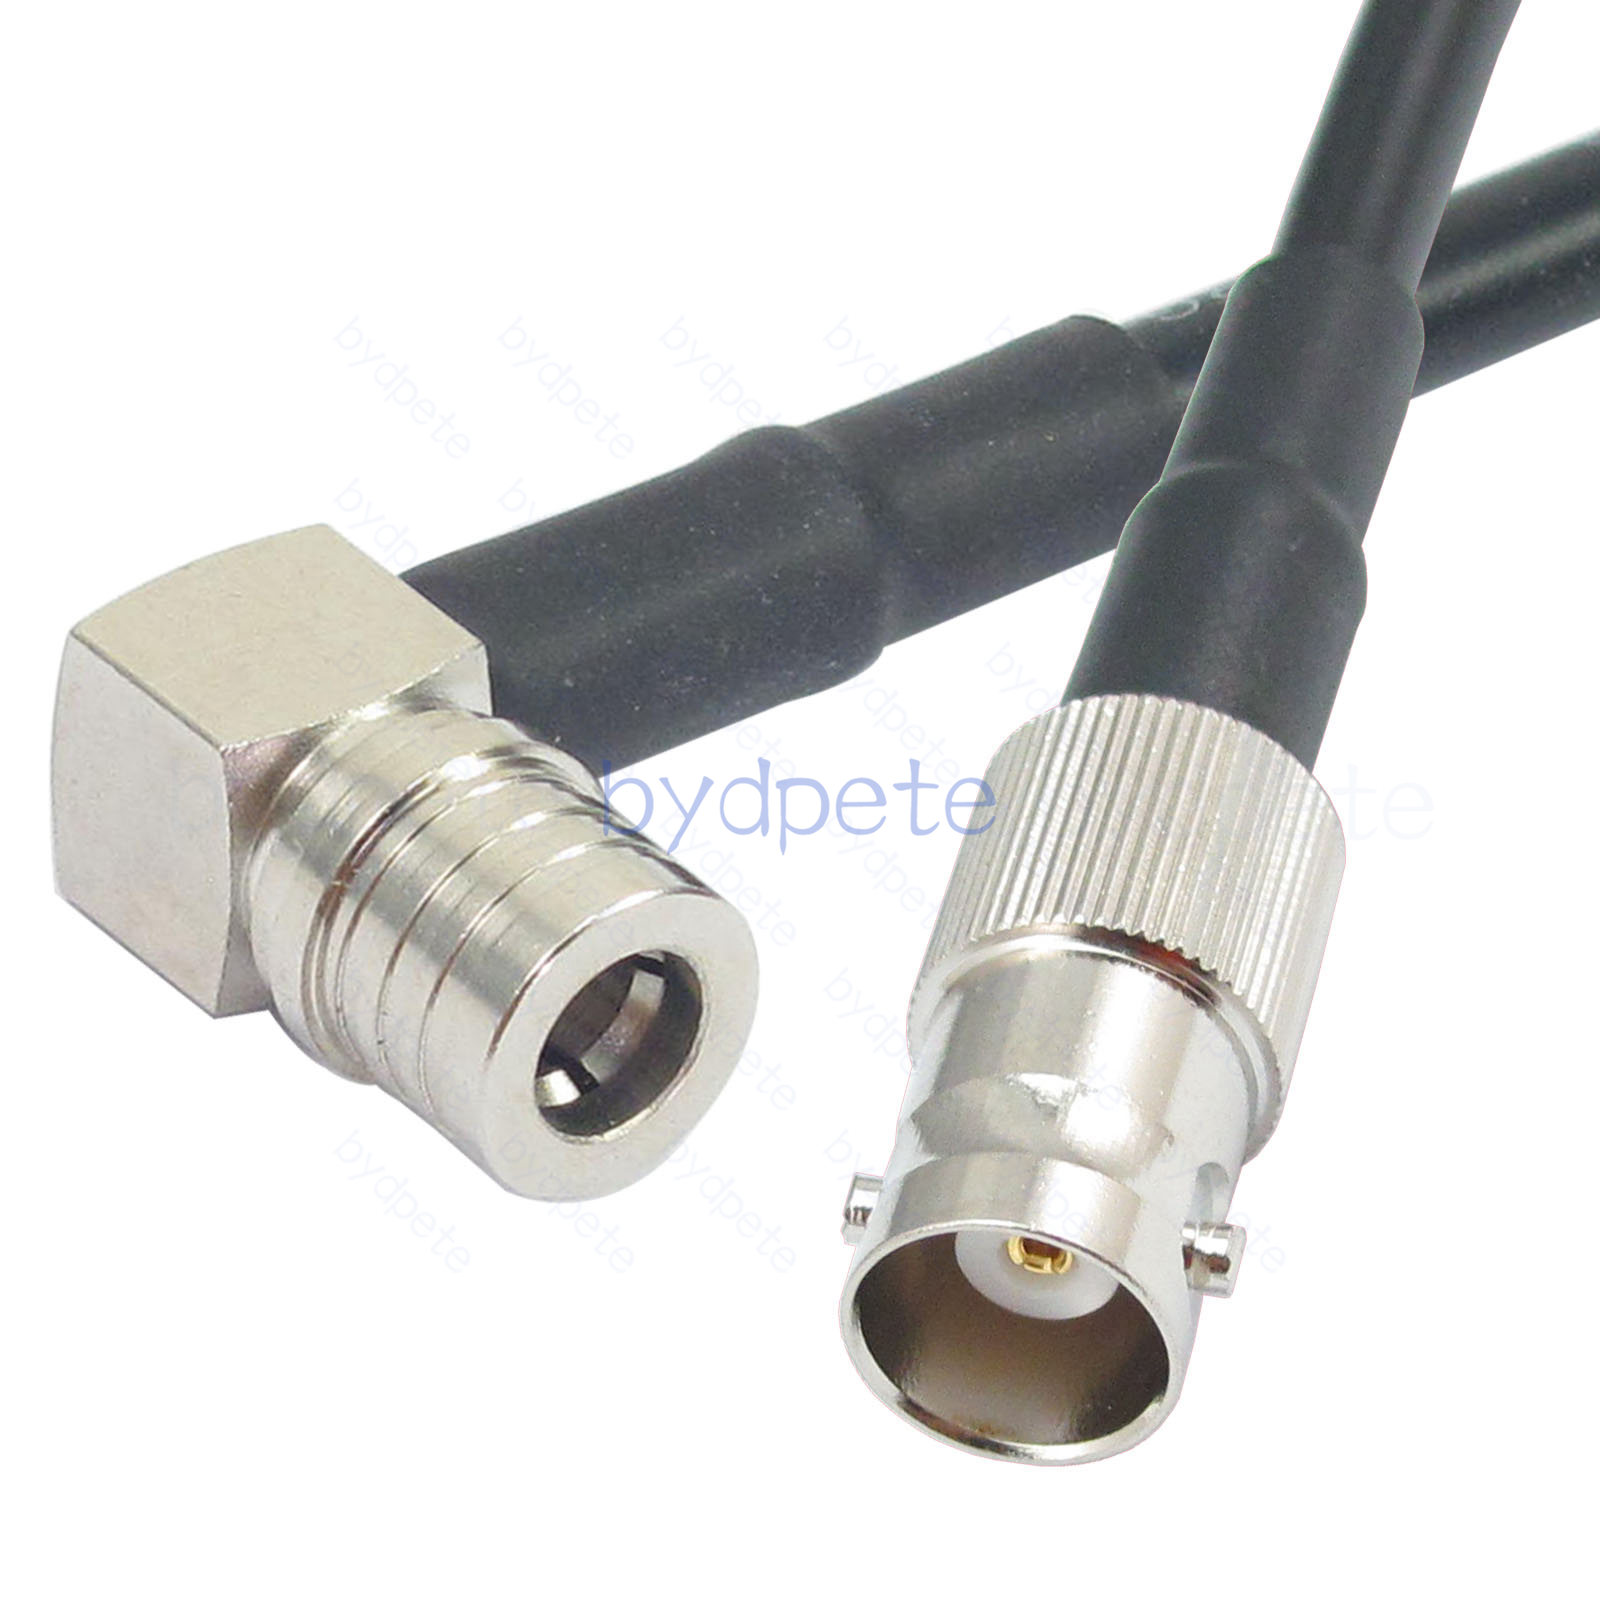 RG58 Cable QMA Male right angle 90degree Plug Connector to BNC Female medium RF Coax Coaxial Any length Lot bydpete BYDC514QMAMR1M258